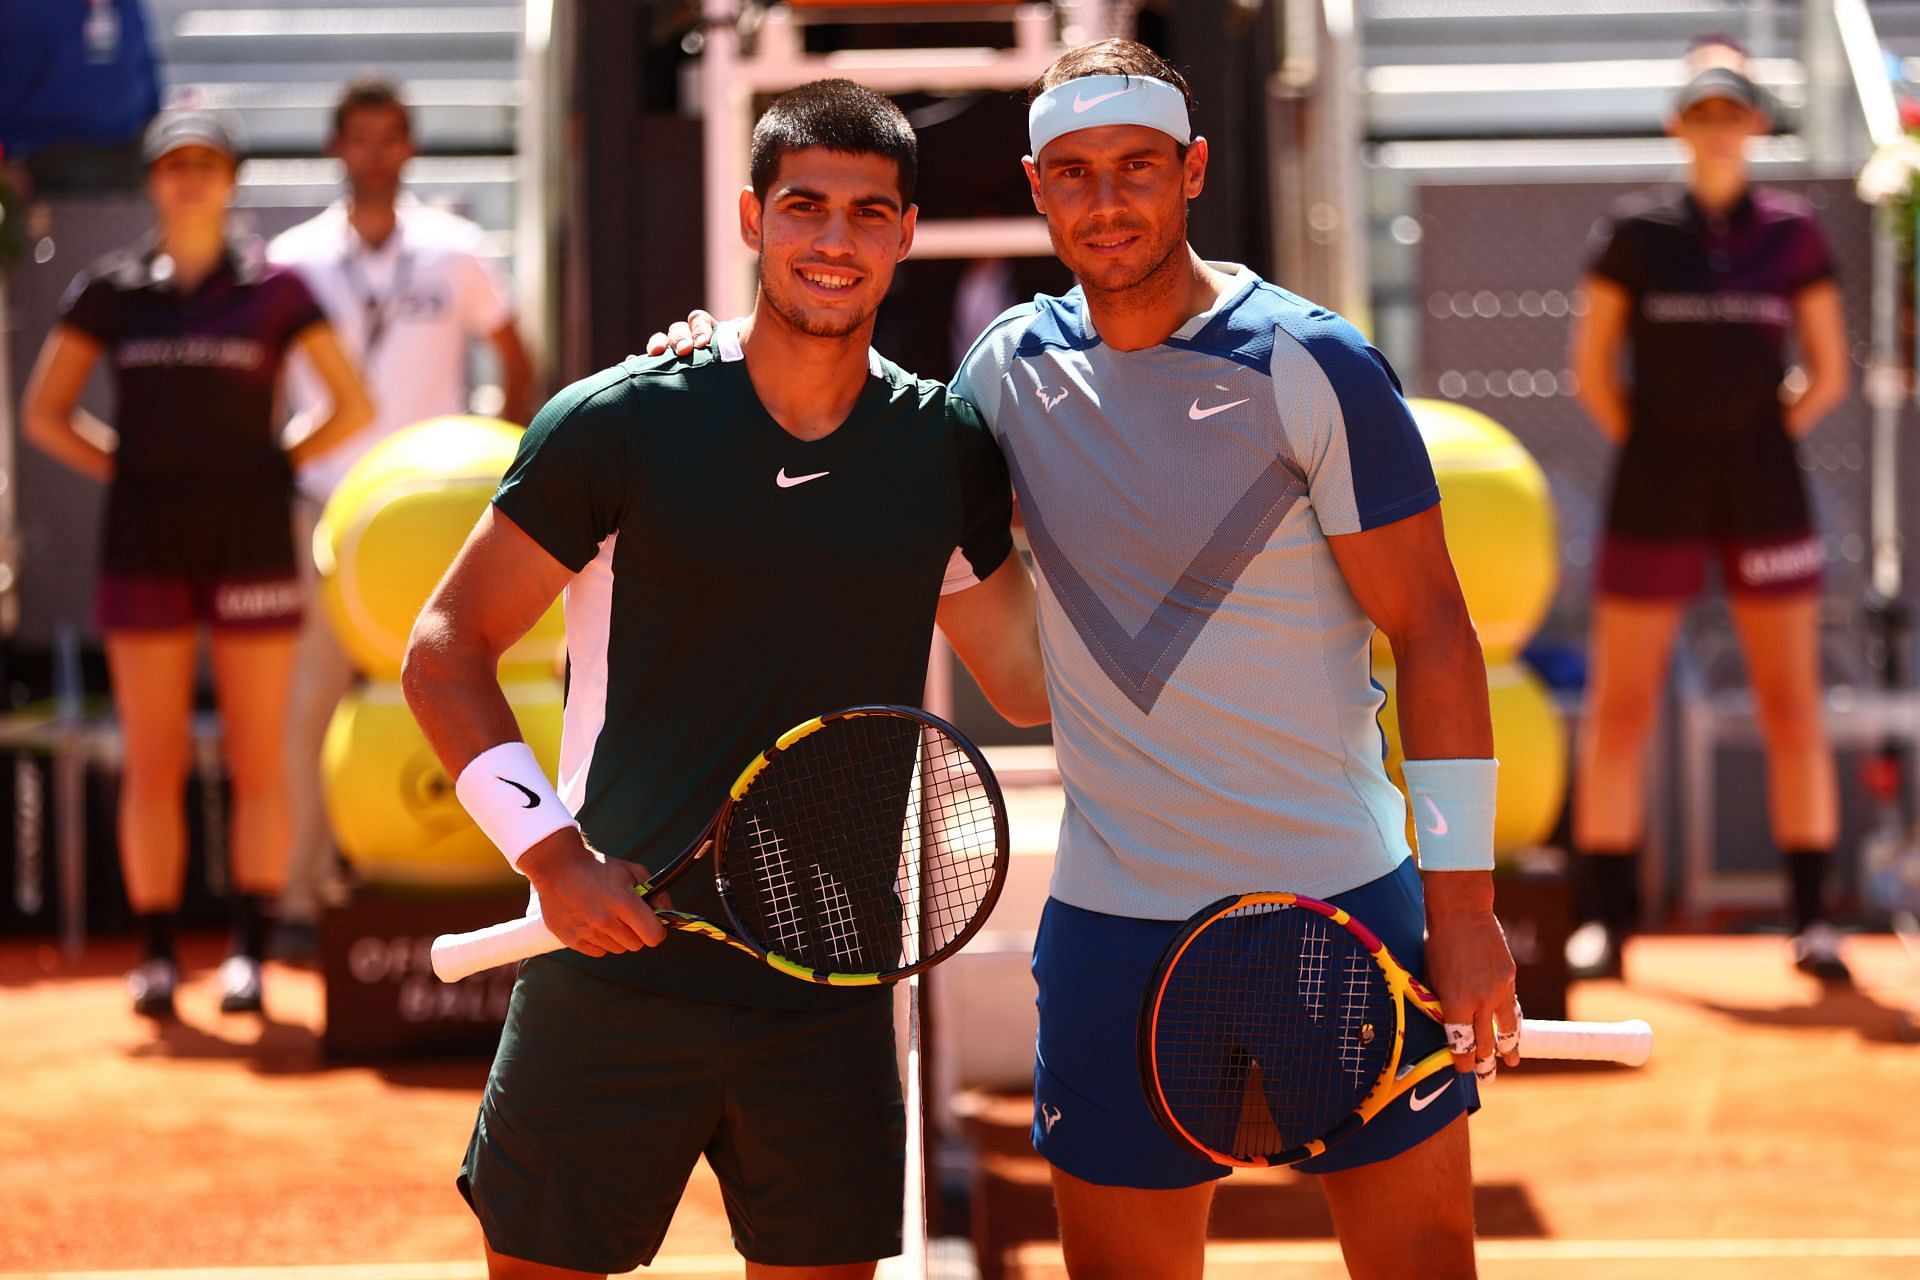 Alcaraz and Nadal pictured at the Madrid Open.